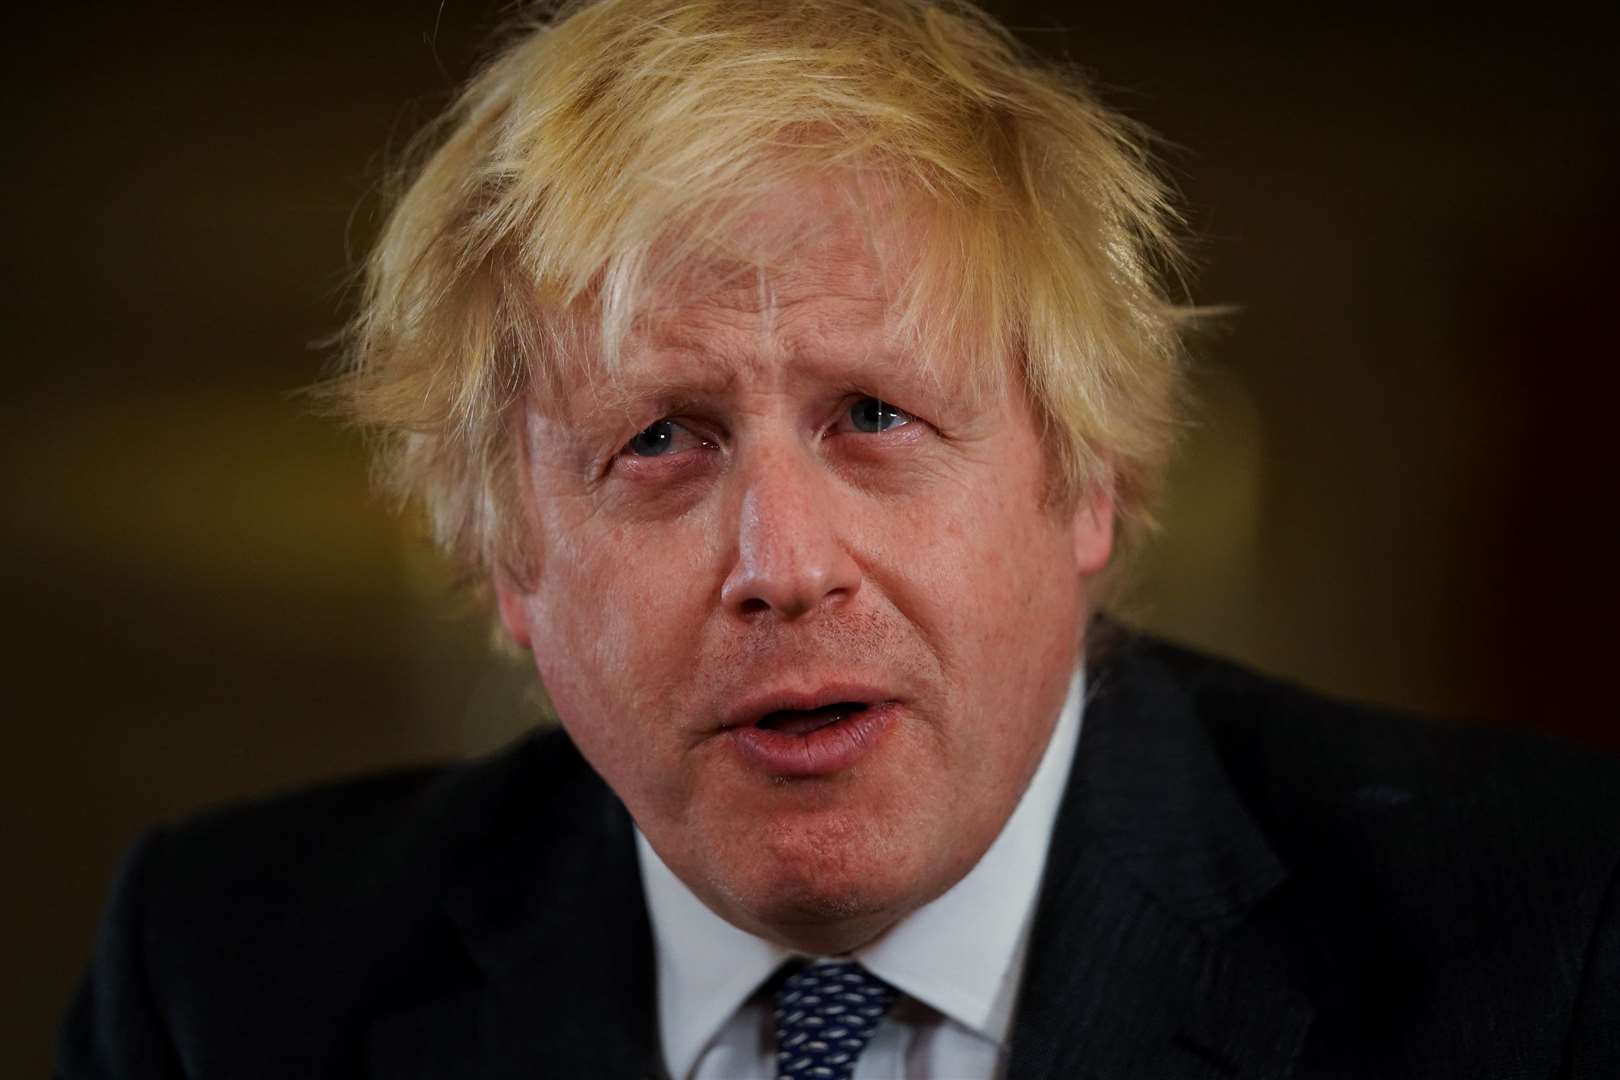 Prime Minister Boris Johnson faces a revolt by some MPs over his plan B proposals